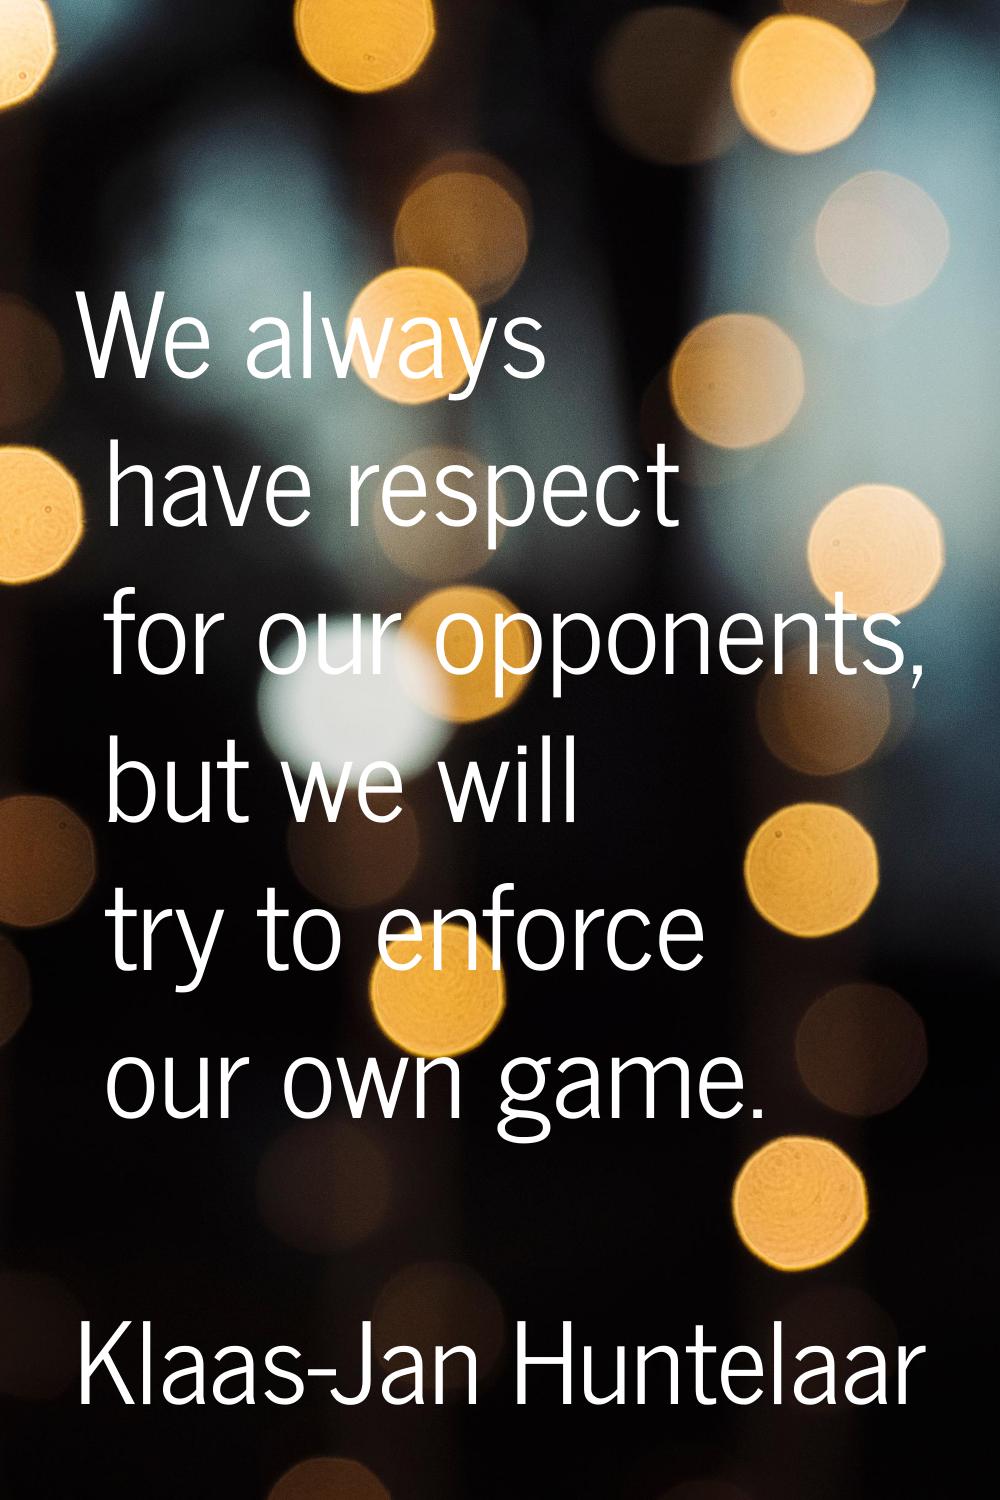 We always have respect for our opponents, but we will try to enforce our own game.